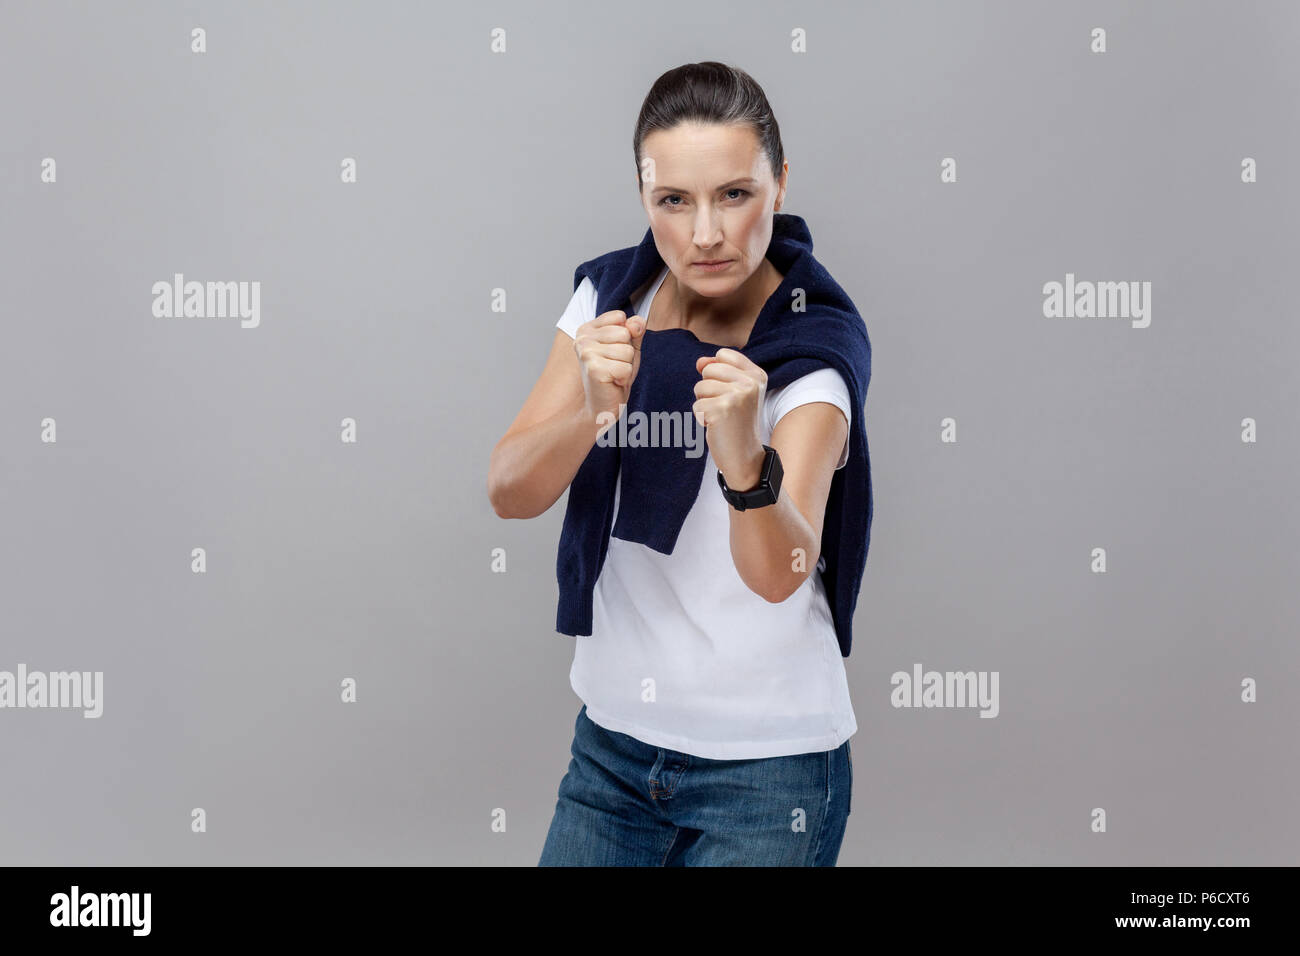 Boxing. Adult woman in casual clothes with blue jeans and sweater on her shoulders, smart watch on arm, ready for fight on grey background. isolated.  Stock Photo